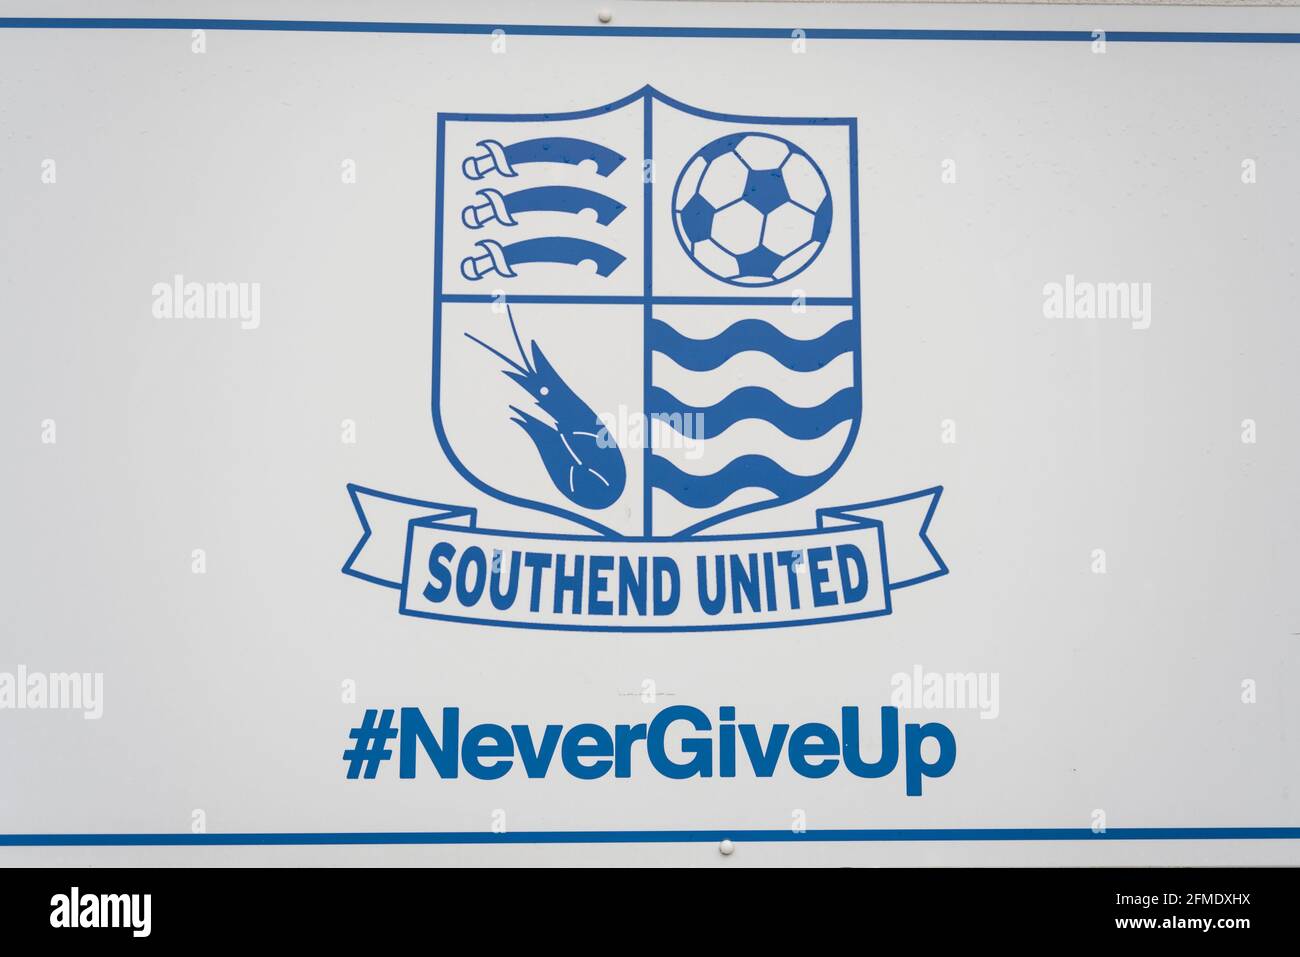 Never give up, club crest outside Roots Hall stadium home of Southend Utd as they played their final game of the season, their last before relegation Stock Photo